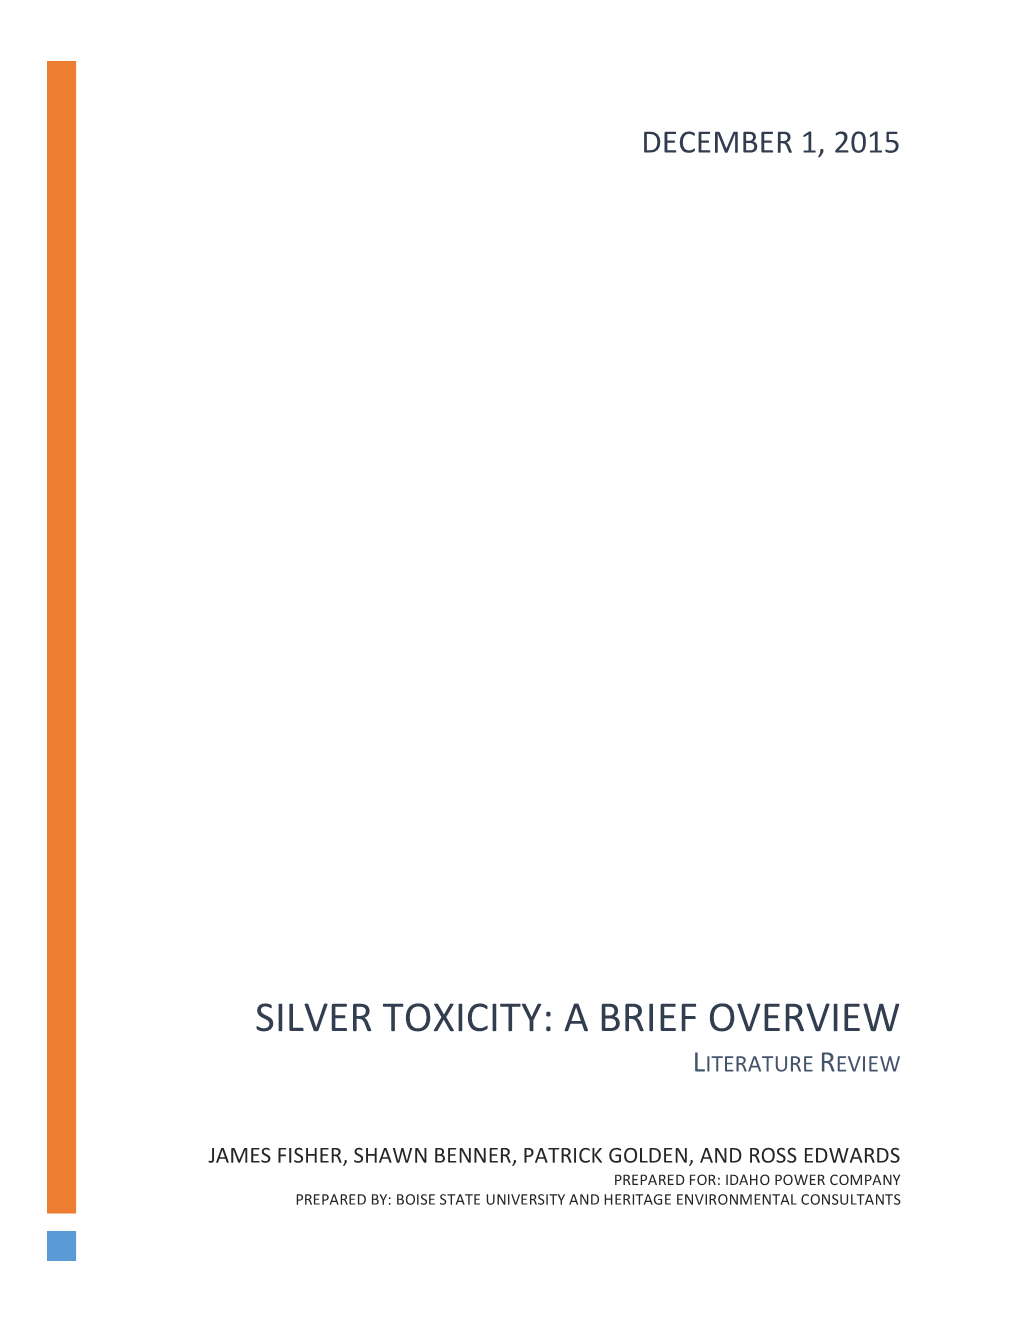 Silver Toxicity: a Brief Overview Literature Review